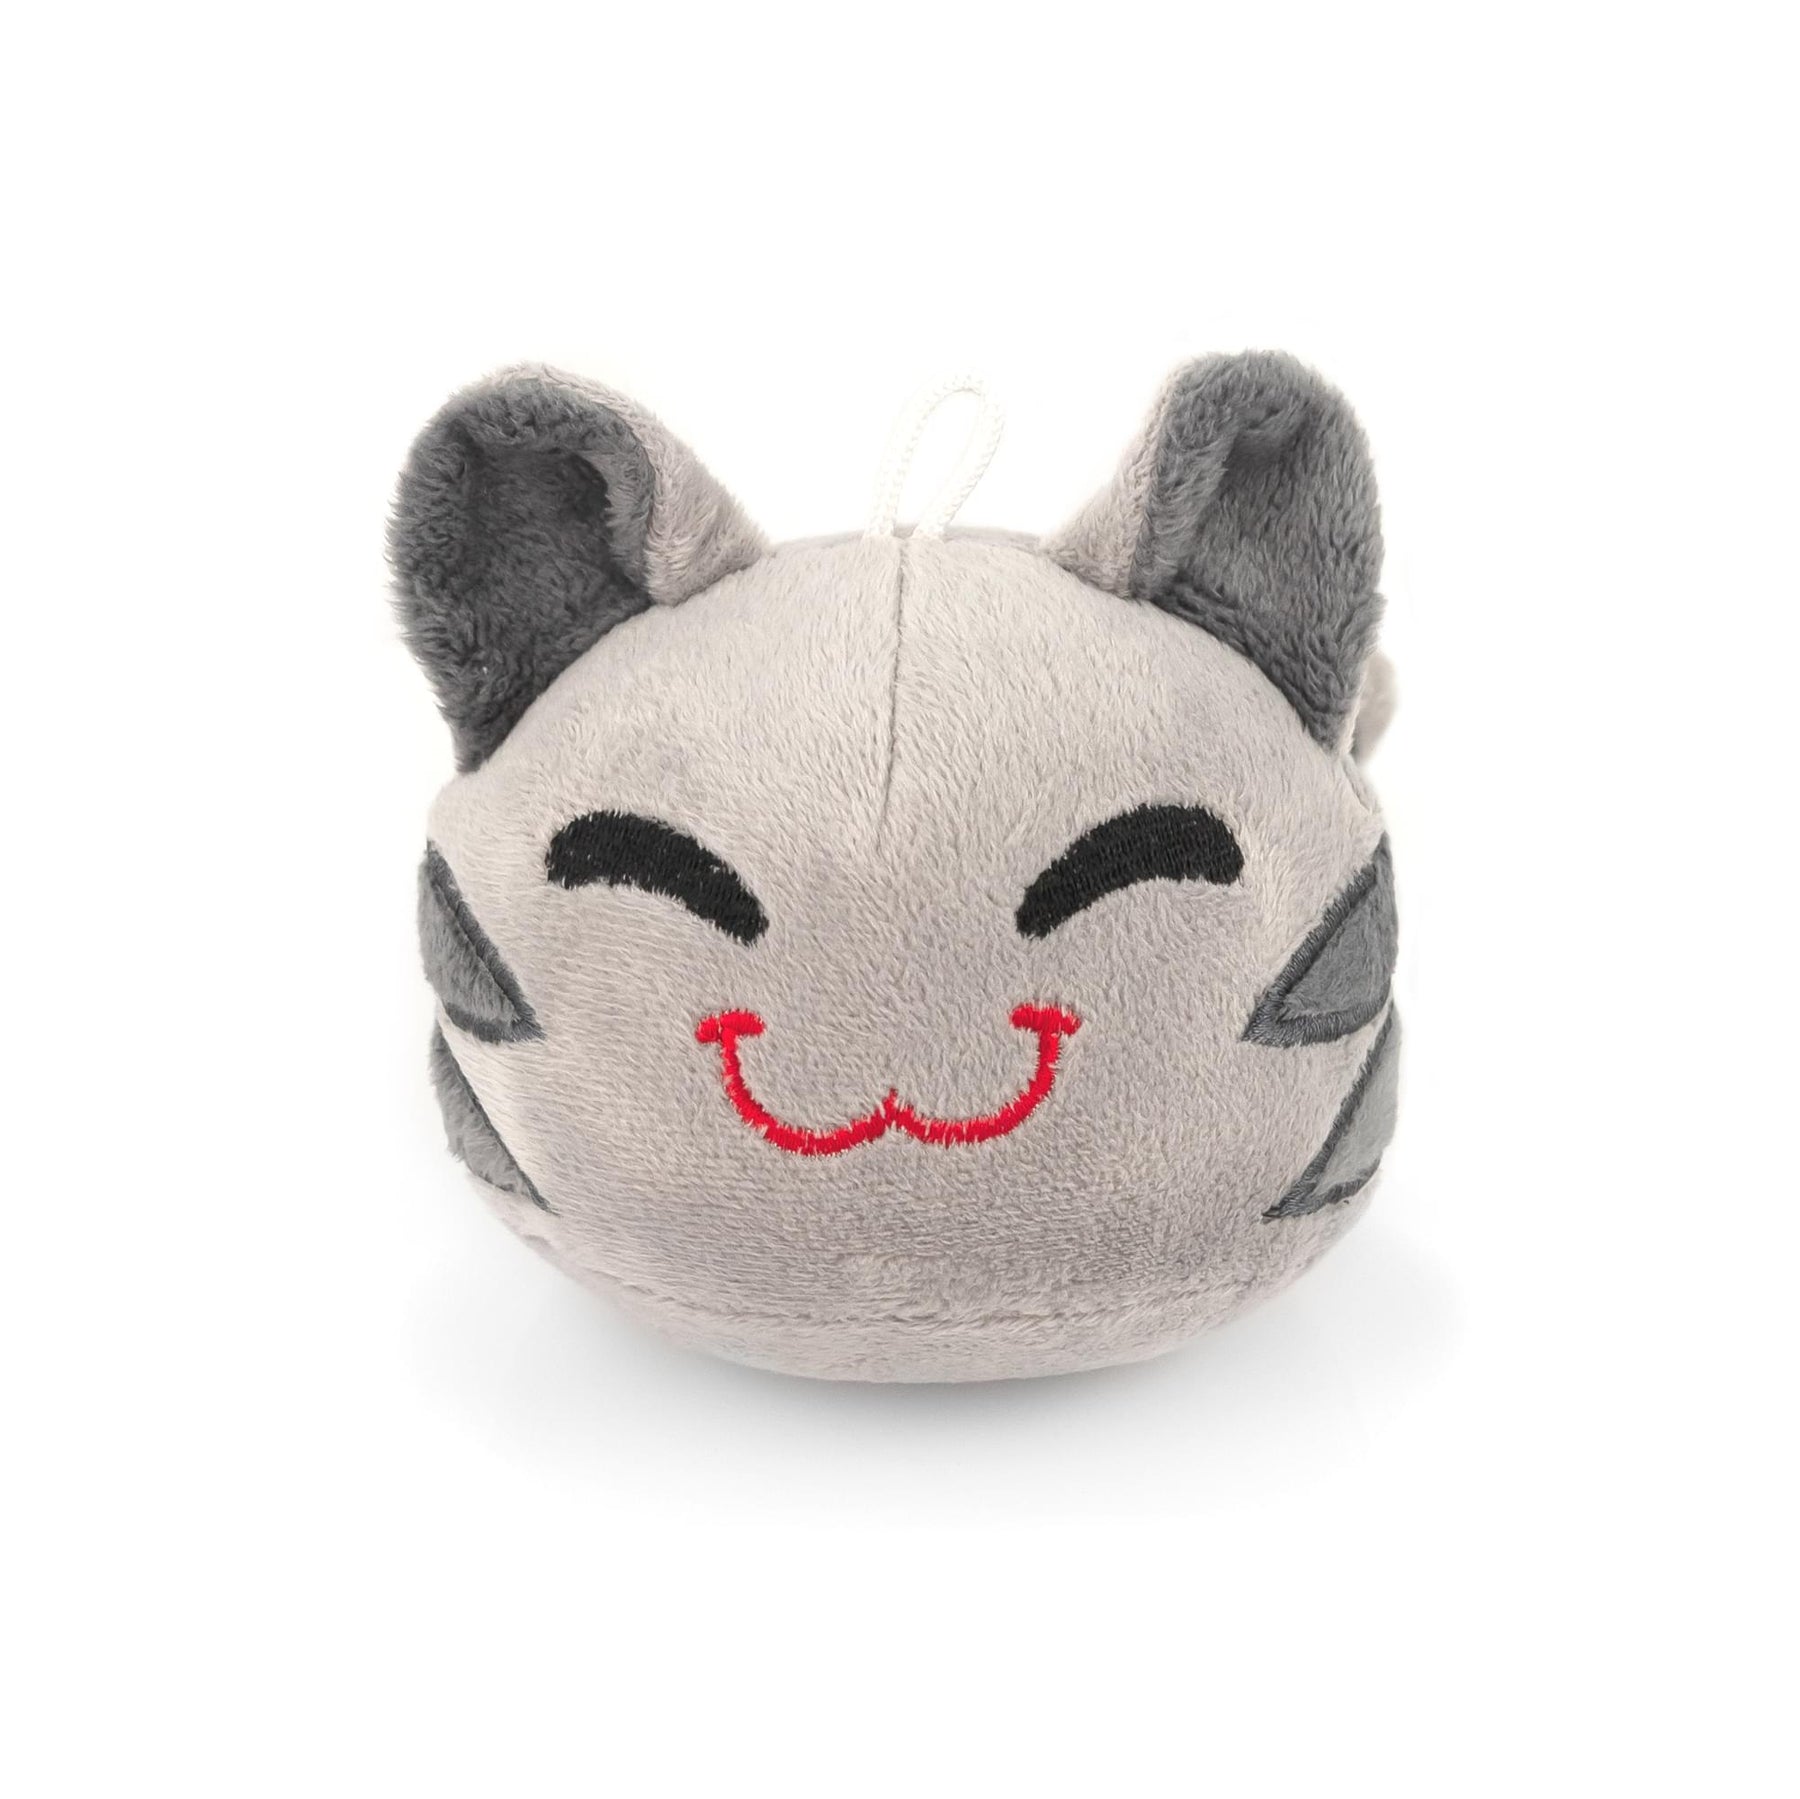 Slime Rancher Plush Toy Bean Bag Plushie | Tabby Slime, by Imaginary People